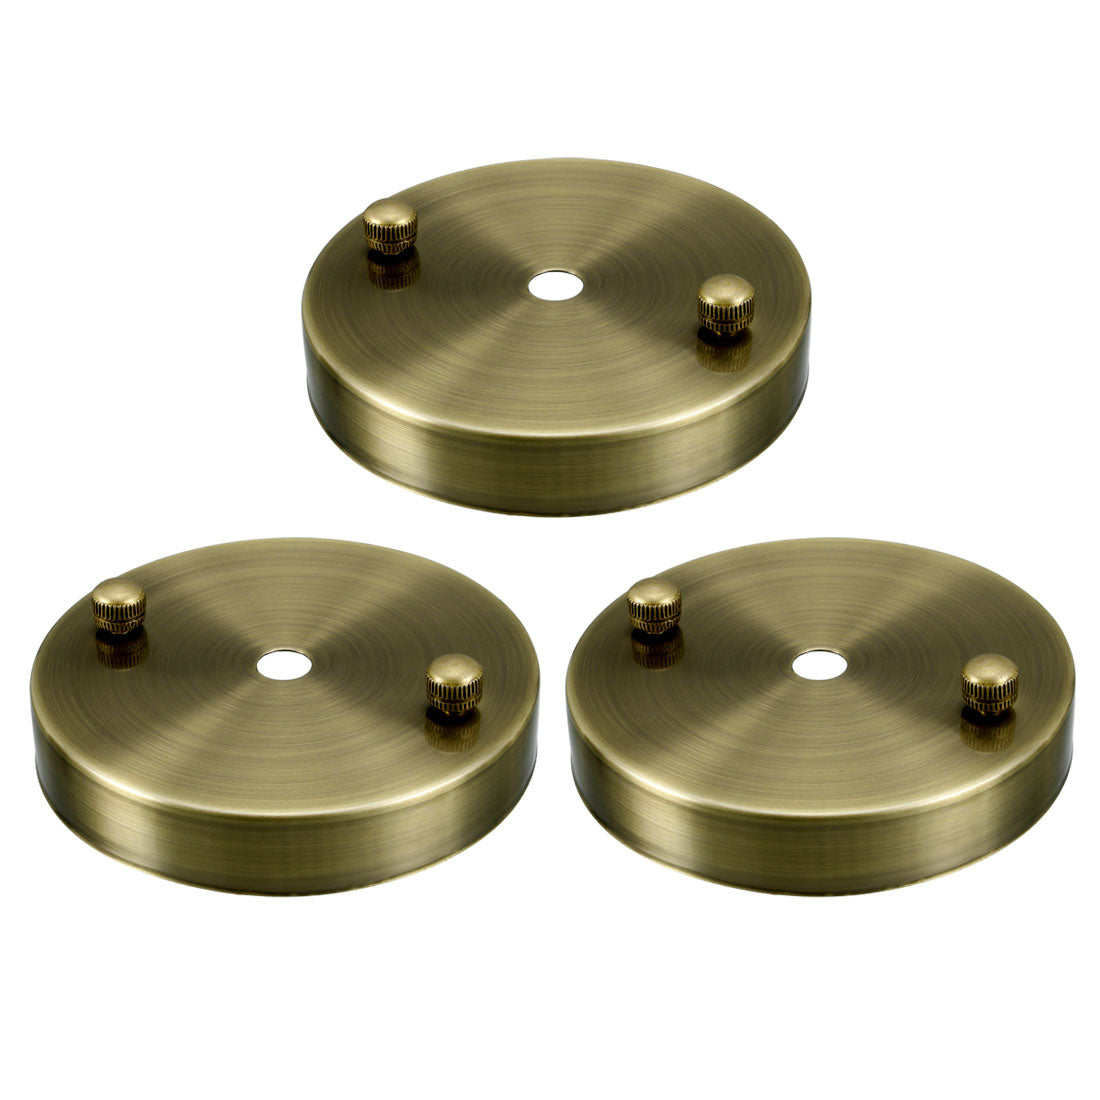 uxcell Uxcell Retro Ceiling Light Plate Pointed Base Chassis Disc Pendant Accessories 100mmx20mm Bronze w Screw 3pcs